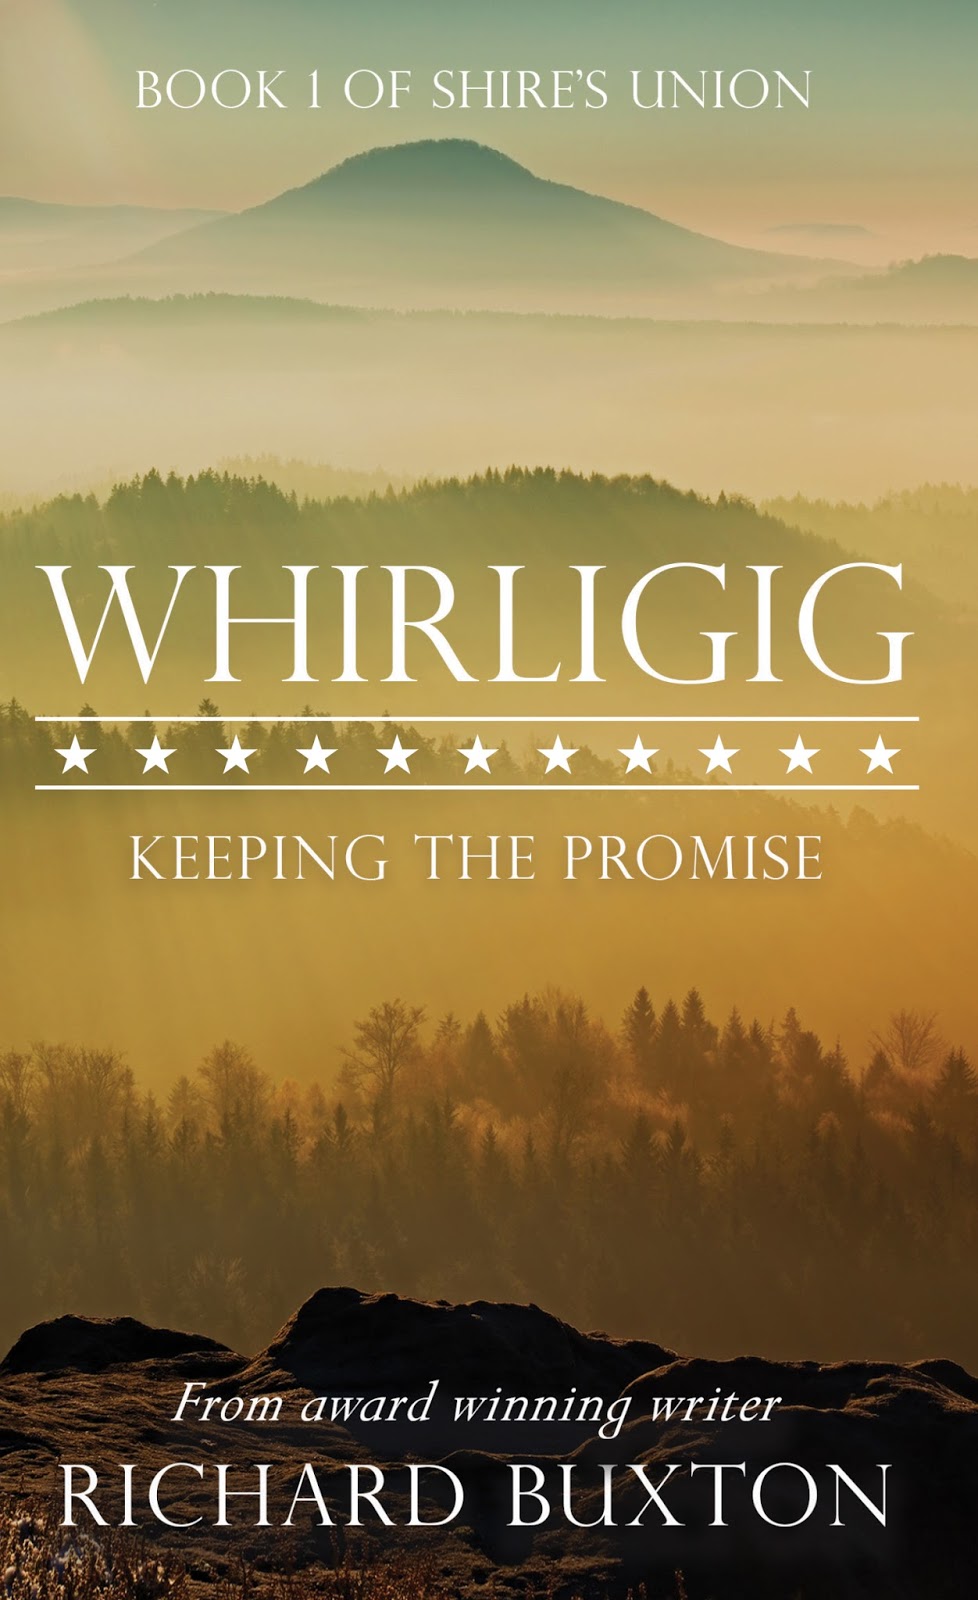 Whirligig Chapters 1&2